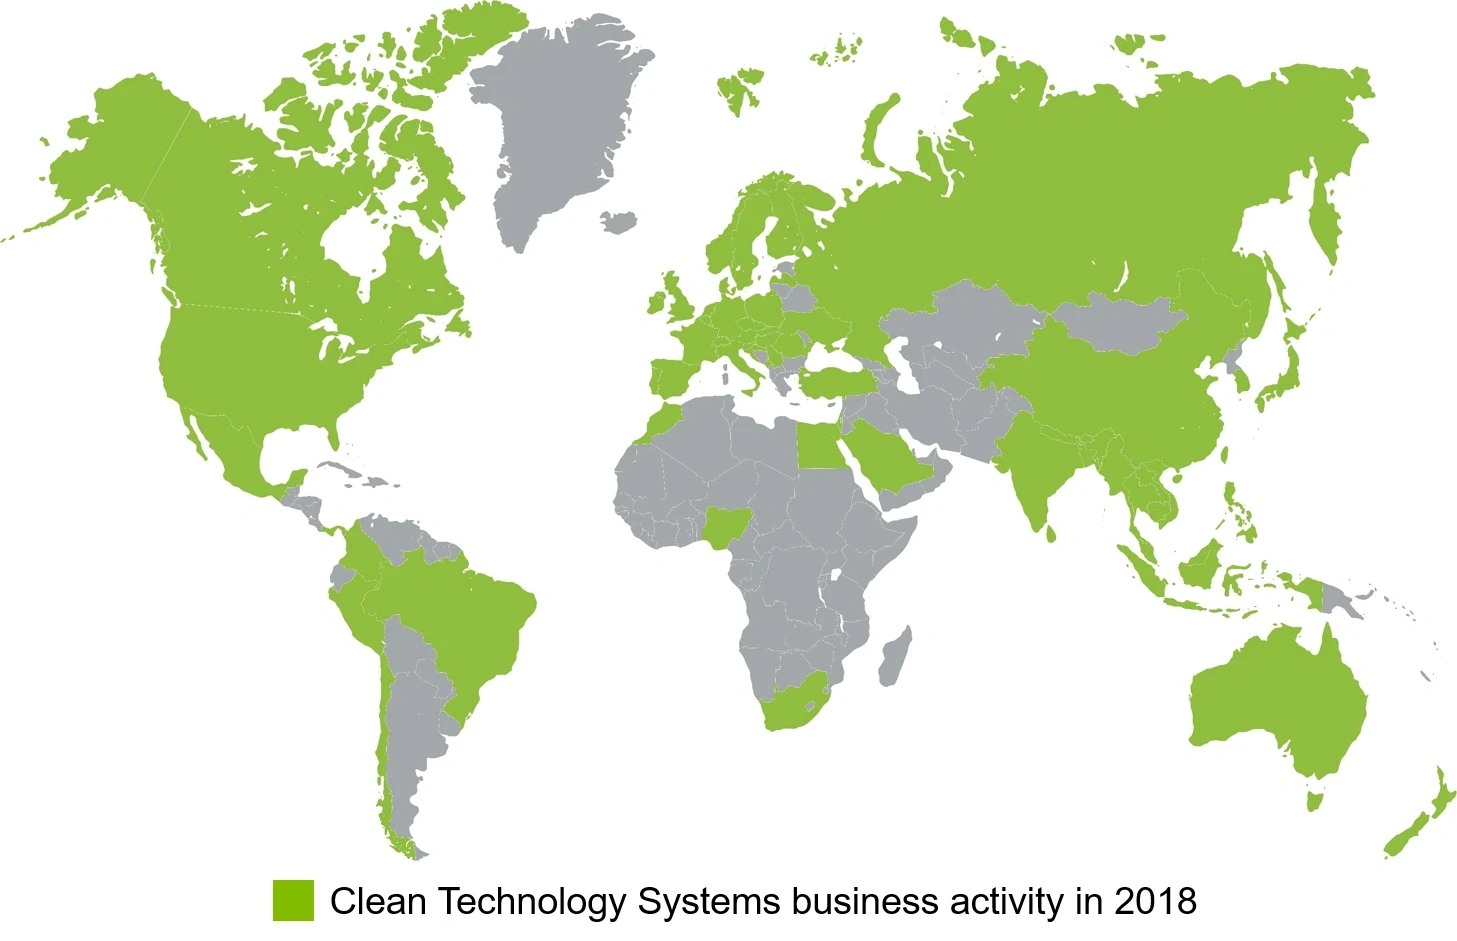 Clean Technology Systems business activity 2018 